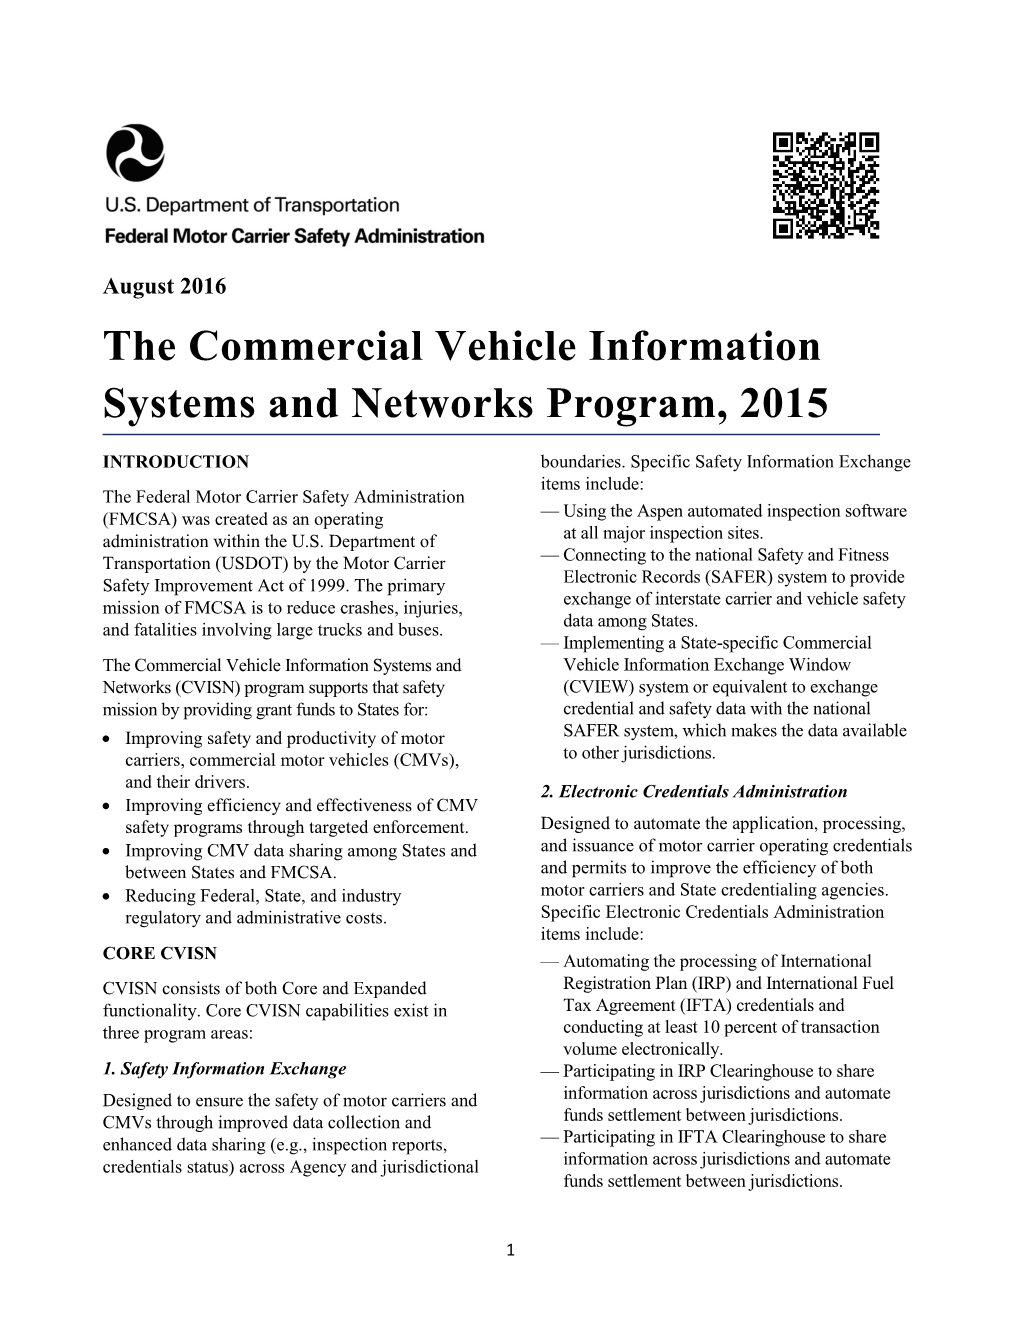 The Commerical Vehicle Information Sytems and Networks Program, 2015